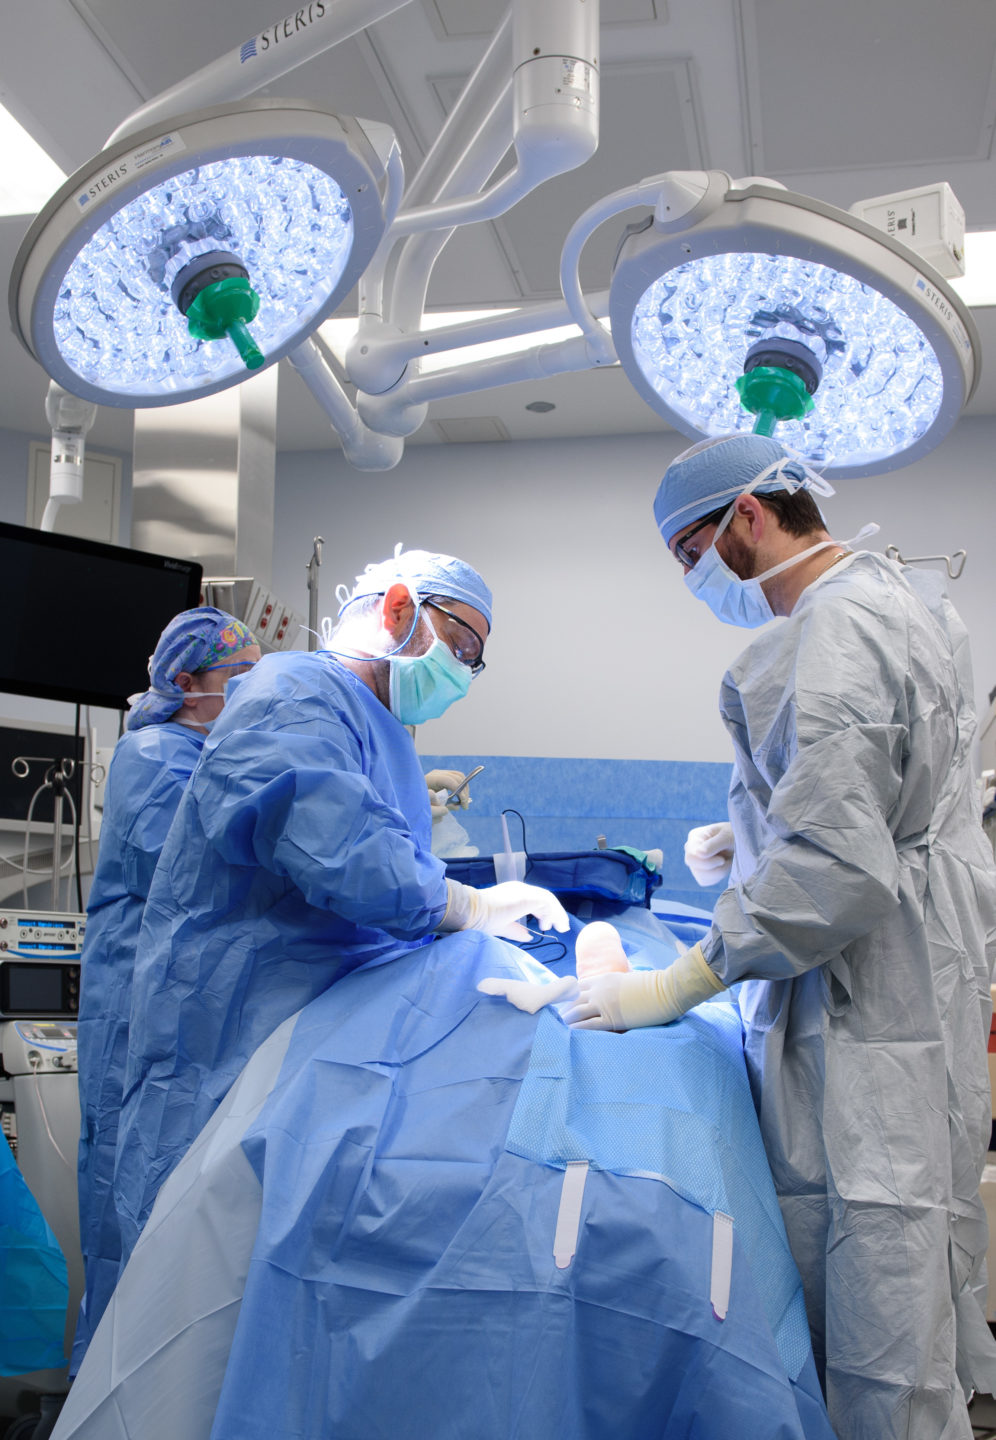  A surgeon and two assistants operate on a patient’s foot in an operating room. 